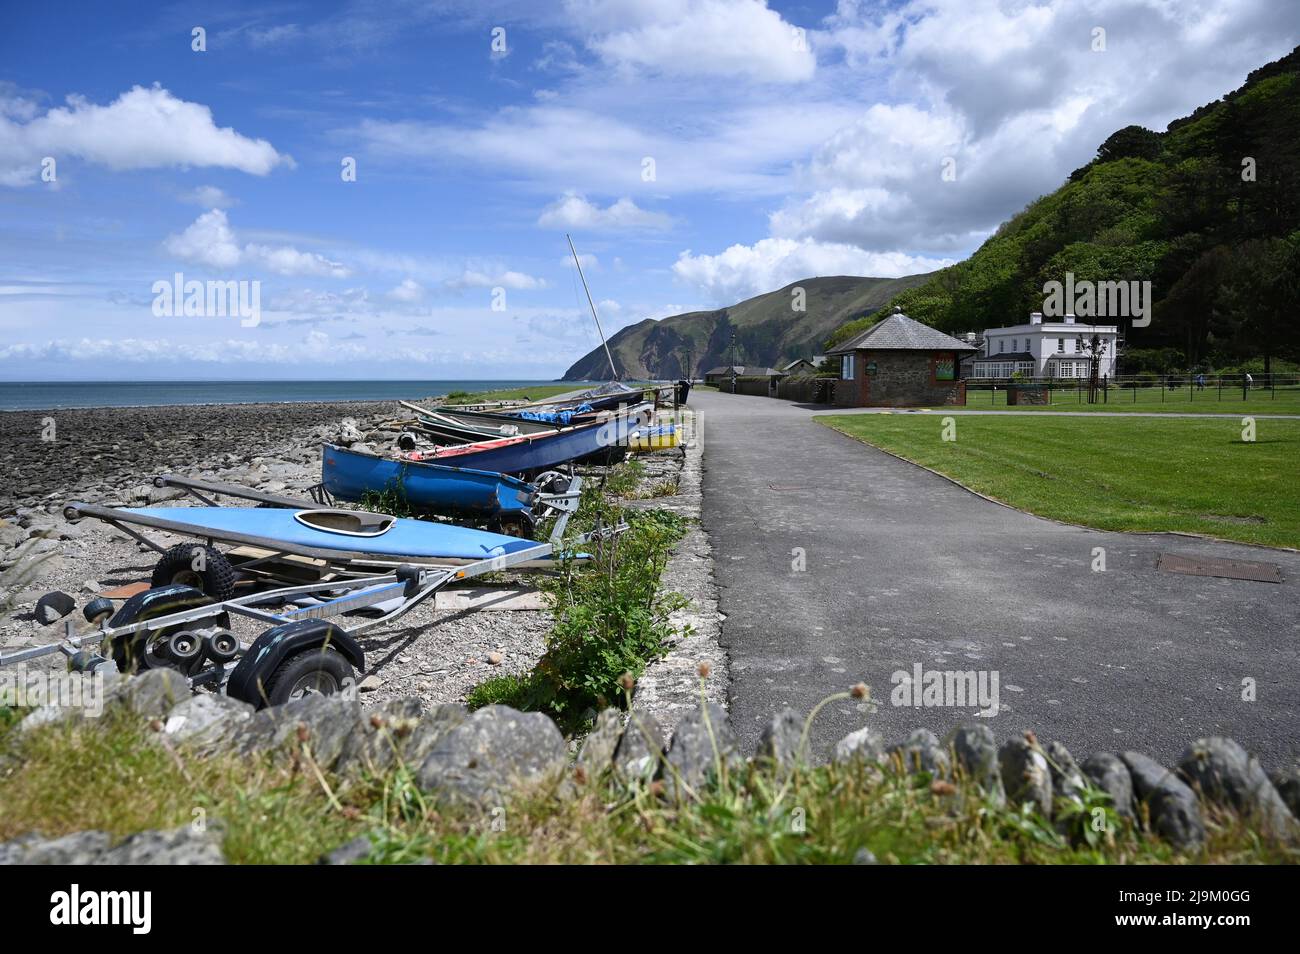 Coastal village of Lynmouth in Devon, England, on the northern edge of Exmoor National Park. Stock Photo